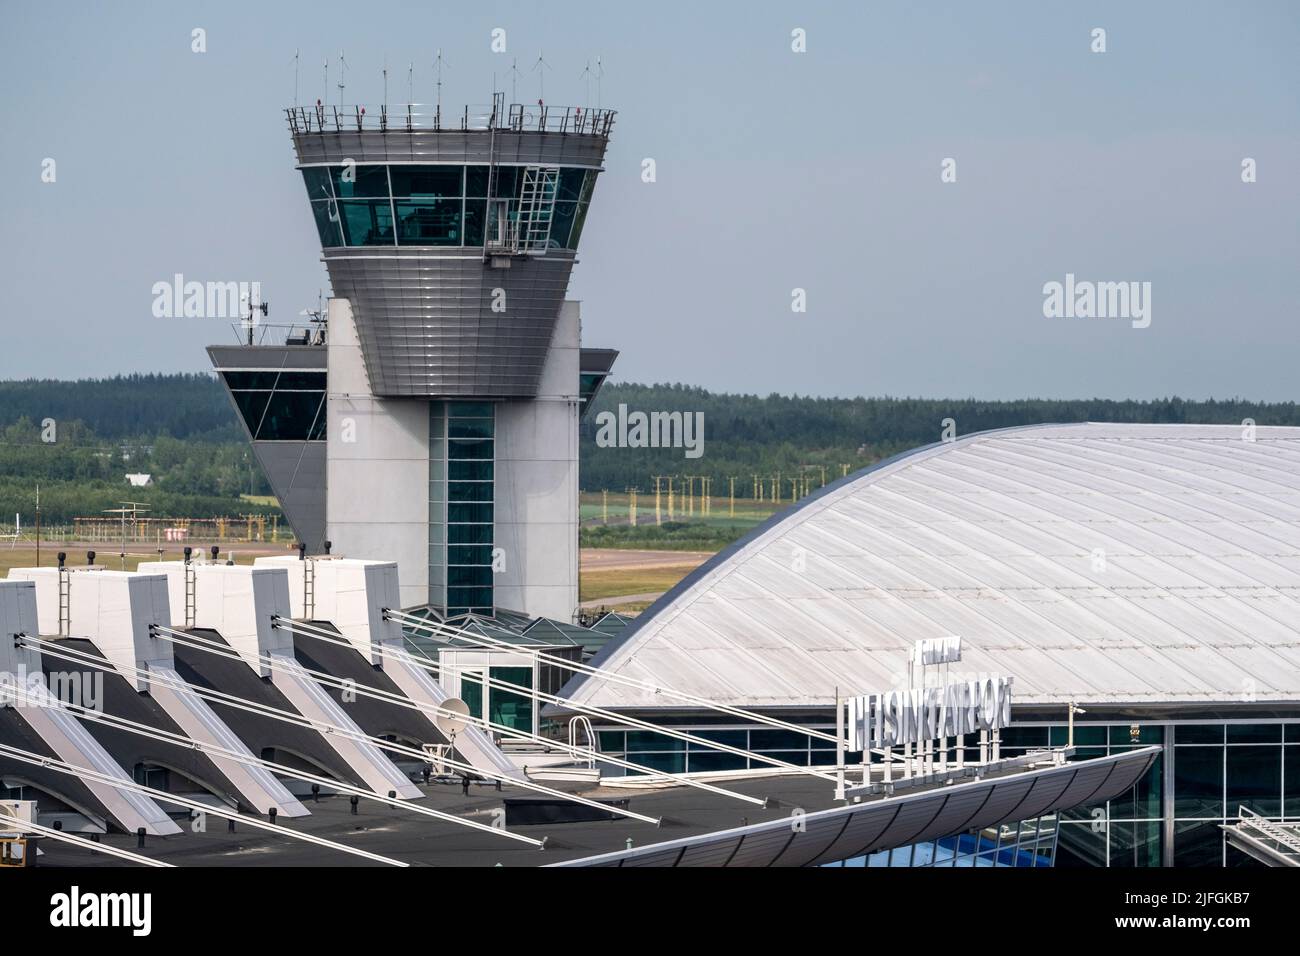 Helsinki / Finland - JULY 2, 2022: Air traffic control tower at the Helsinki Airport, operated by Finavia Stock Photo